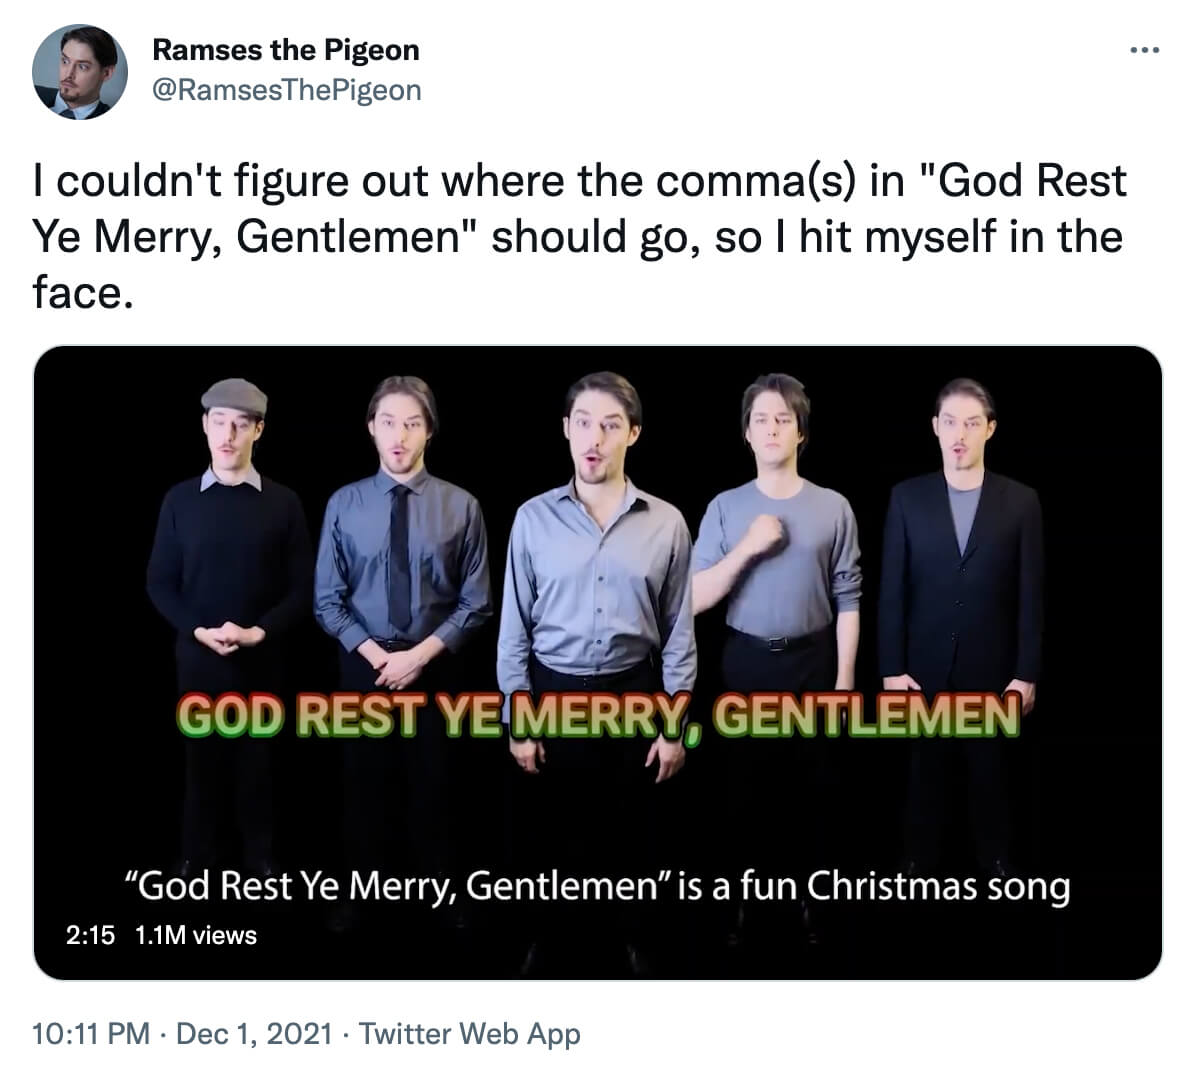 @RamsesThePigeon on Twitter: I couldn't figure out where the comma(s) in God Rest Ye Merry, Gentlemen should go, so I hit myself in the face. -God Rest Ye Merry Gentlemen parody video-